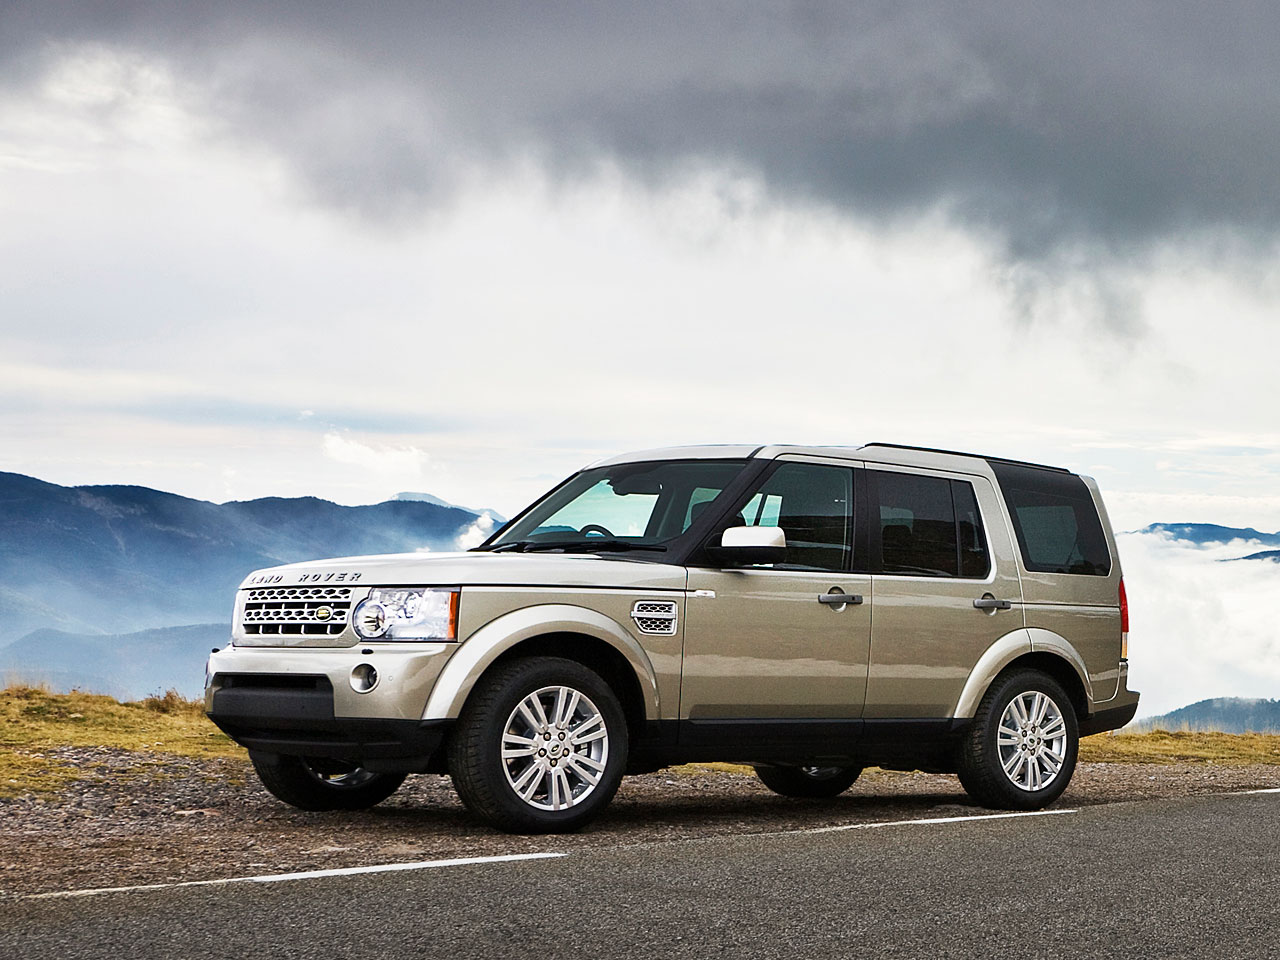 Land Rover Discovery 2010 تـــــ ح ـــفة Wplandroverdiscovery2010-11223-040-f